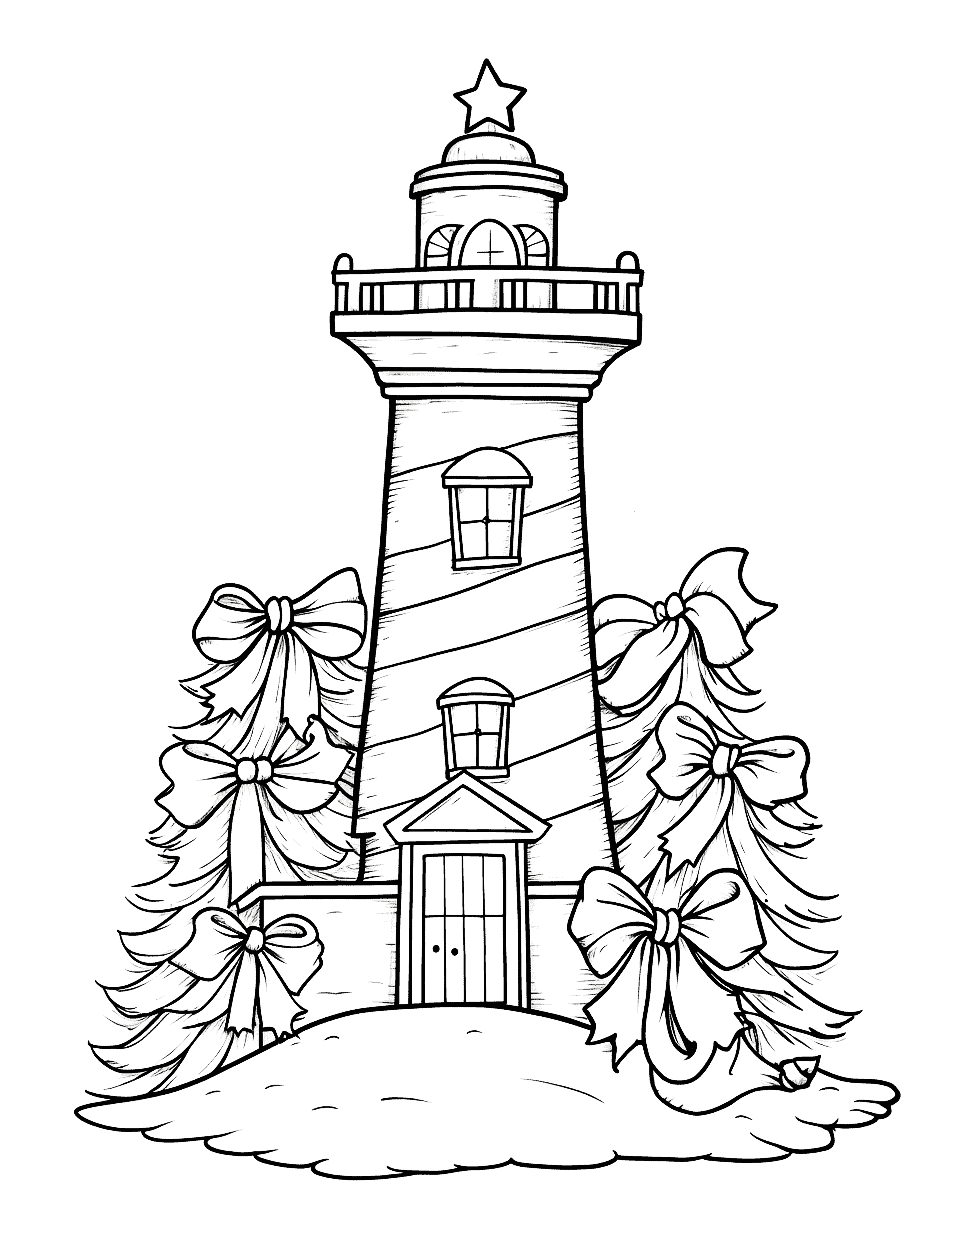 Christmas Lighthouse Coloring Page - A lighthouse guiding Santa’s sleigh with its festive light.